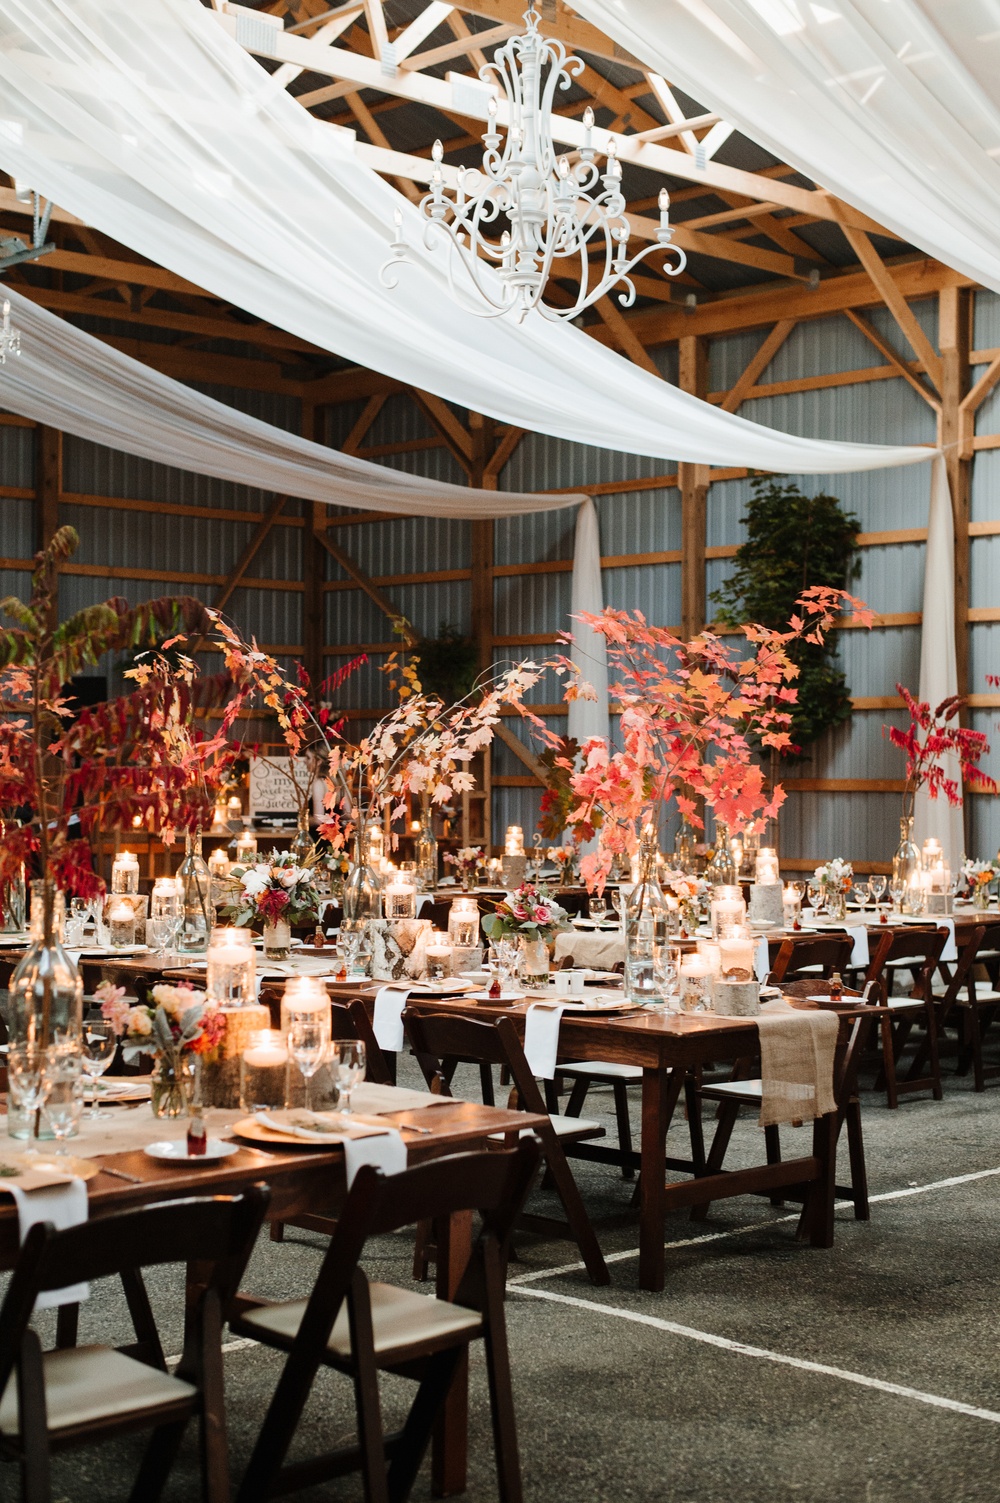 The Rustic Chic Fall Wedding Of Our Pinterest Dreams Ruffled